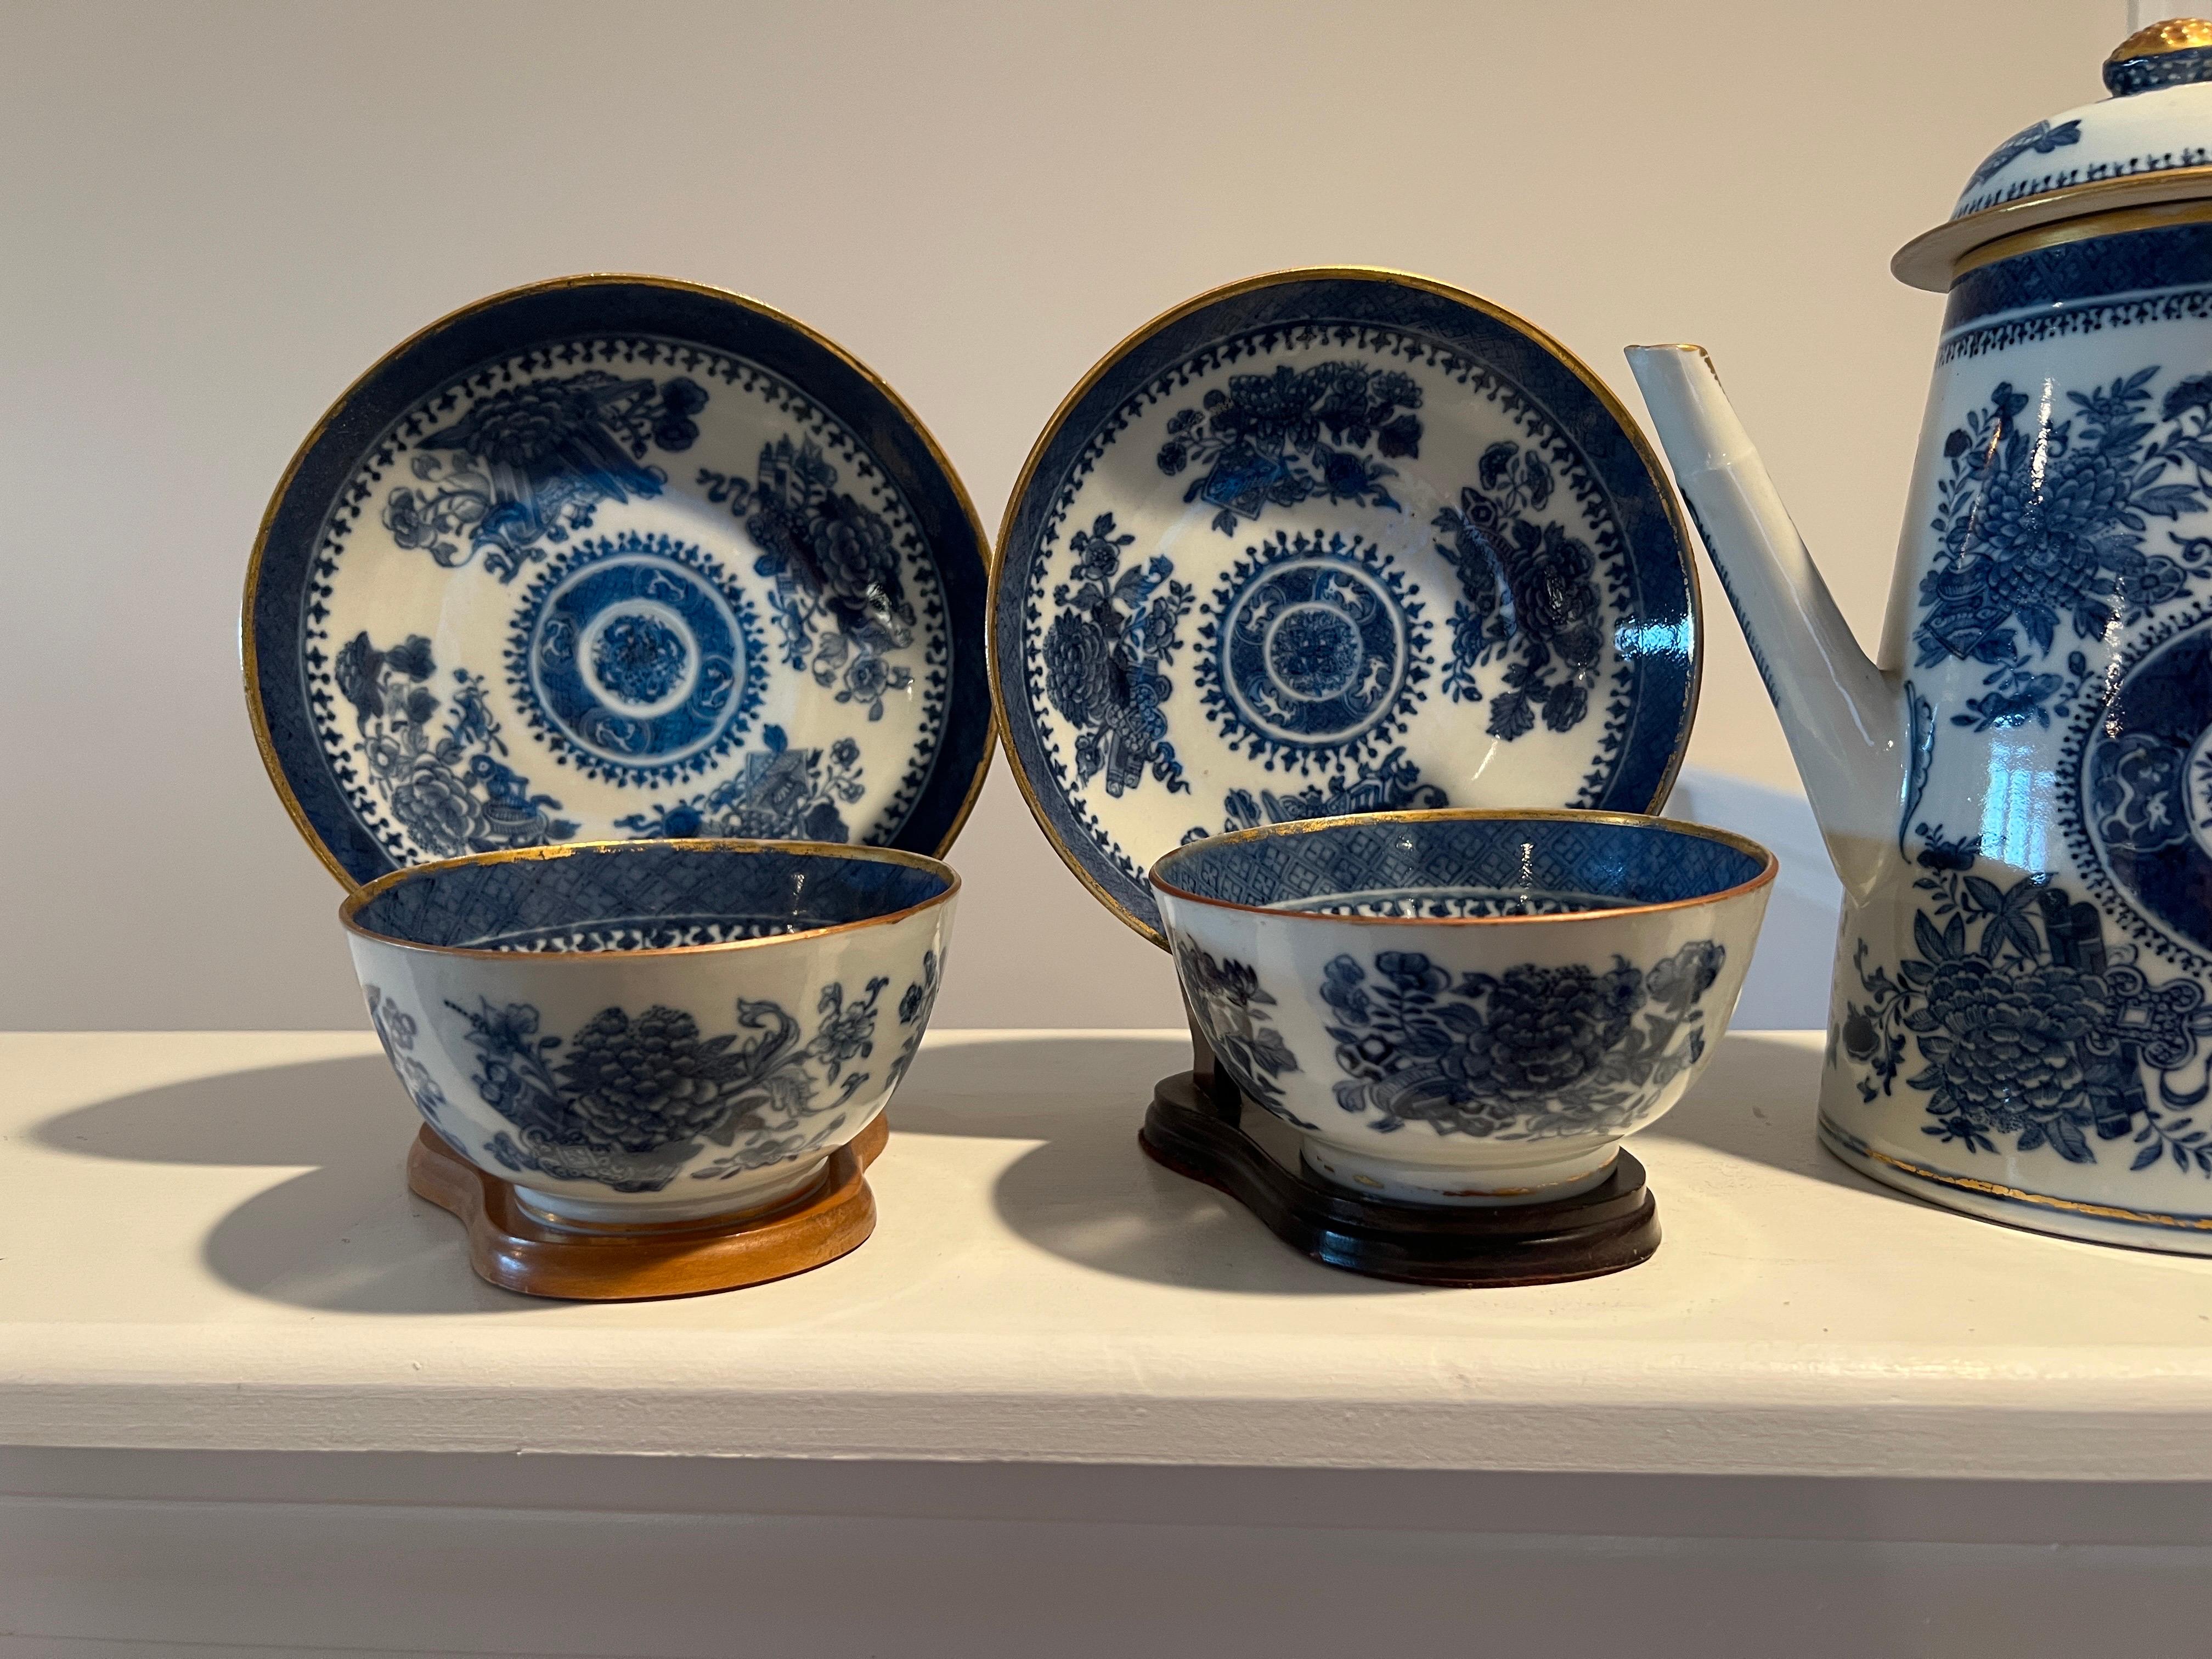 Chinese, 18th century.

A nine peice grouping of Chinese export porcelain for the American or European market in the famous 